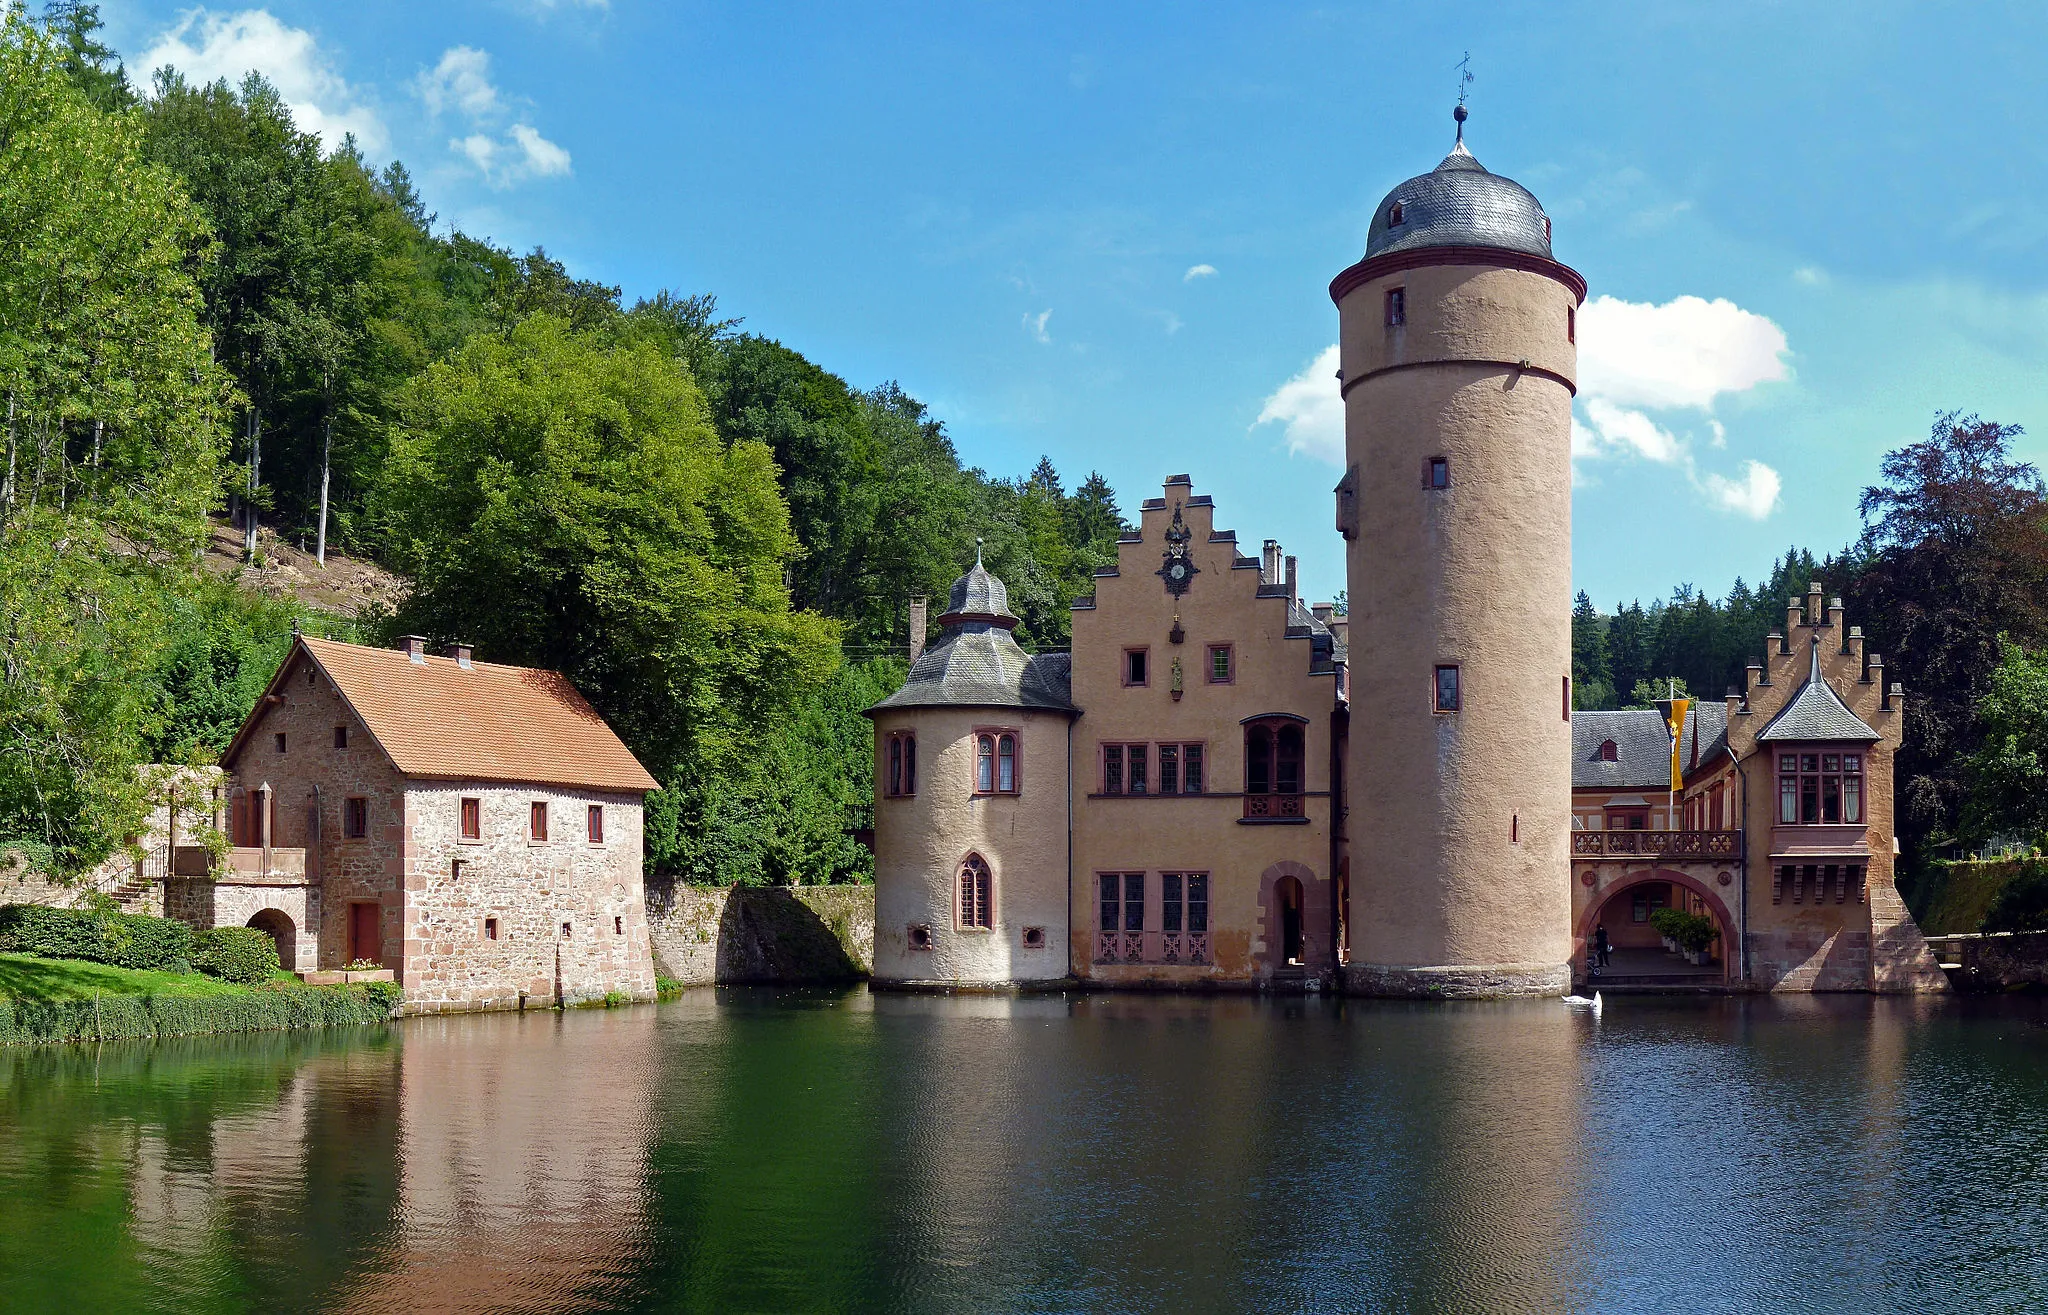 Photo showing: The Mespelbrunn Castle, a moated castle on the territory of the town of Mespelbrunn, is situated remotely in the Elsava valley in the Spessart (between Frankfurt and Würzburg). Since the early 15th century it has been owned by the family Echter of Mespelbrunn. The oldest parts were built in 1427, the current appearance was created from 1551 to 1569.
The castle was location of the 1958 German comedy film The Spessart Inn with the the famous German cinema actress Liselotte Pulver. Consequently it gained  nationwide popularity. It is one of the most visited moated castles in Germany and is frequently featured in tourist books. The annual numbers of visitors are just under 100,000.